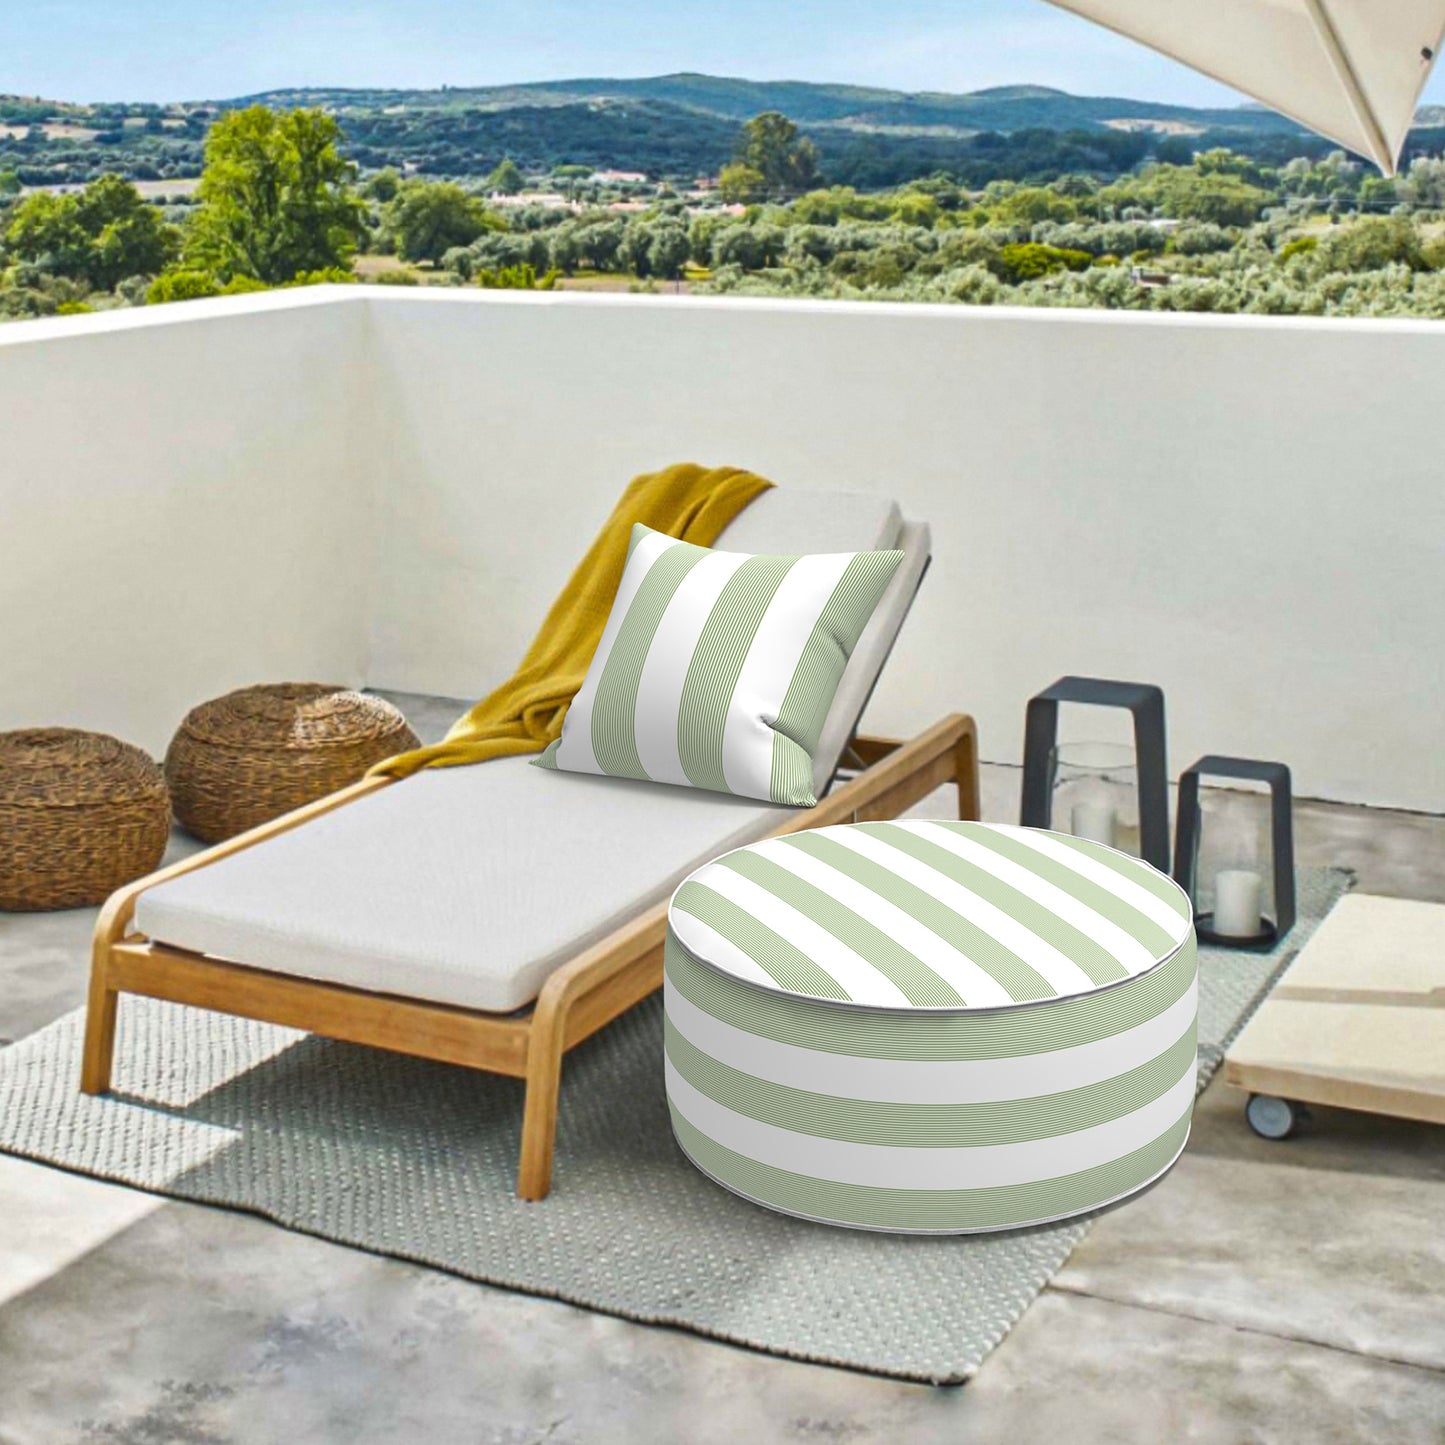 Outdoor Inflatable Stool Ottoman, All Weather Portable Footrest Stool, Furniture Stool Ottomans for Home Garden Beach, D31”xH14”, Stripe Cabana Green